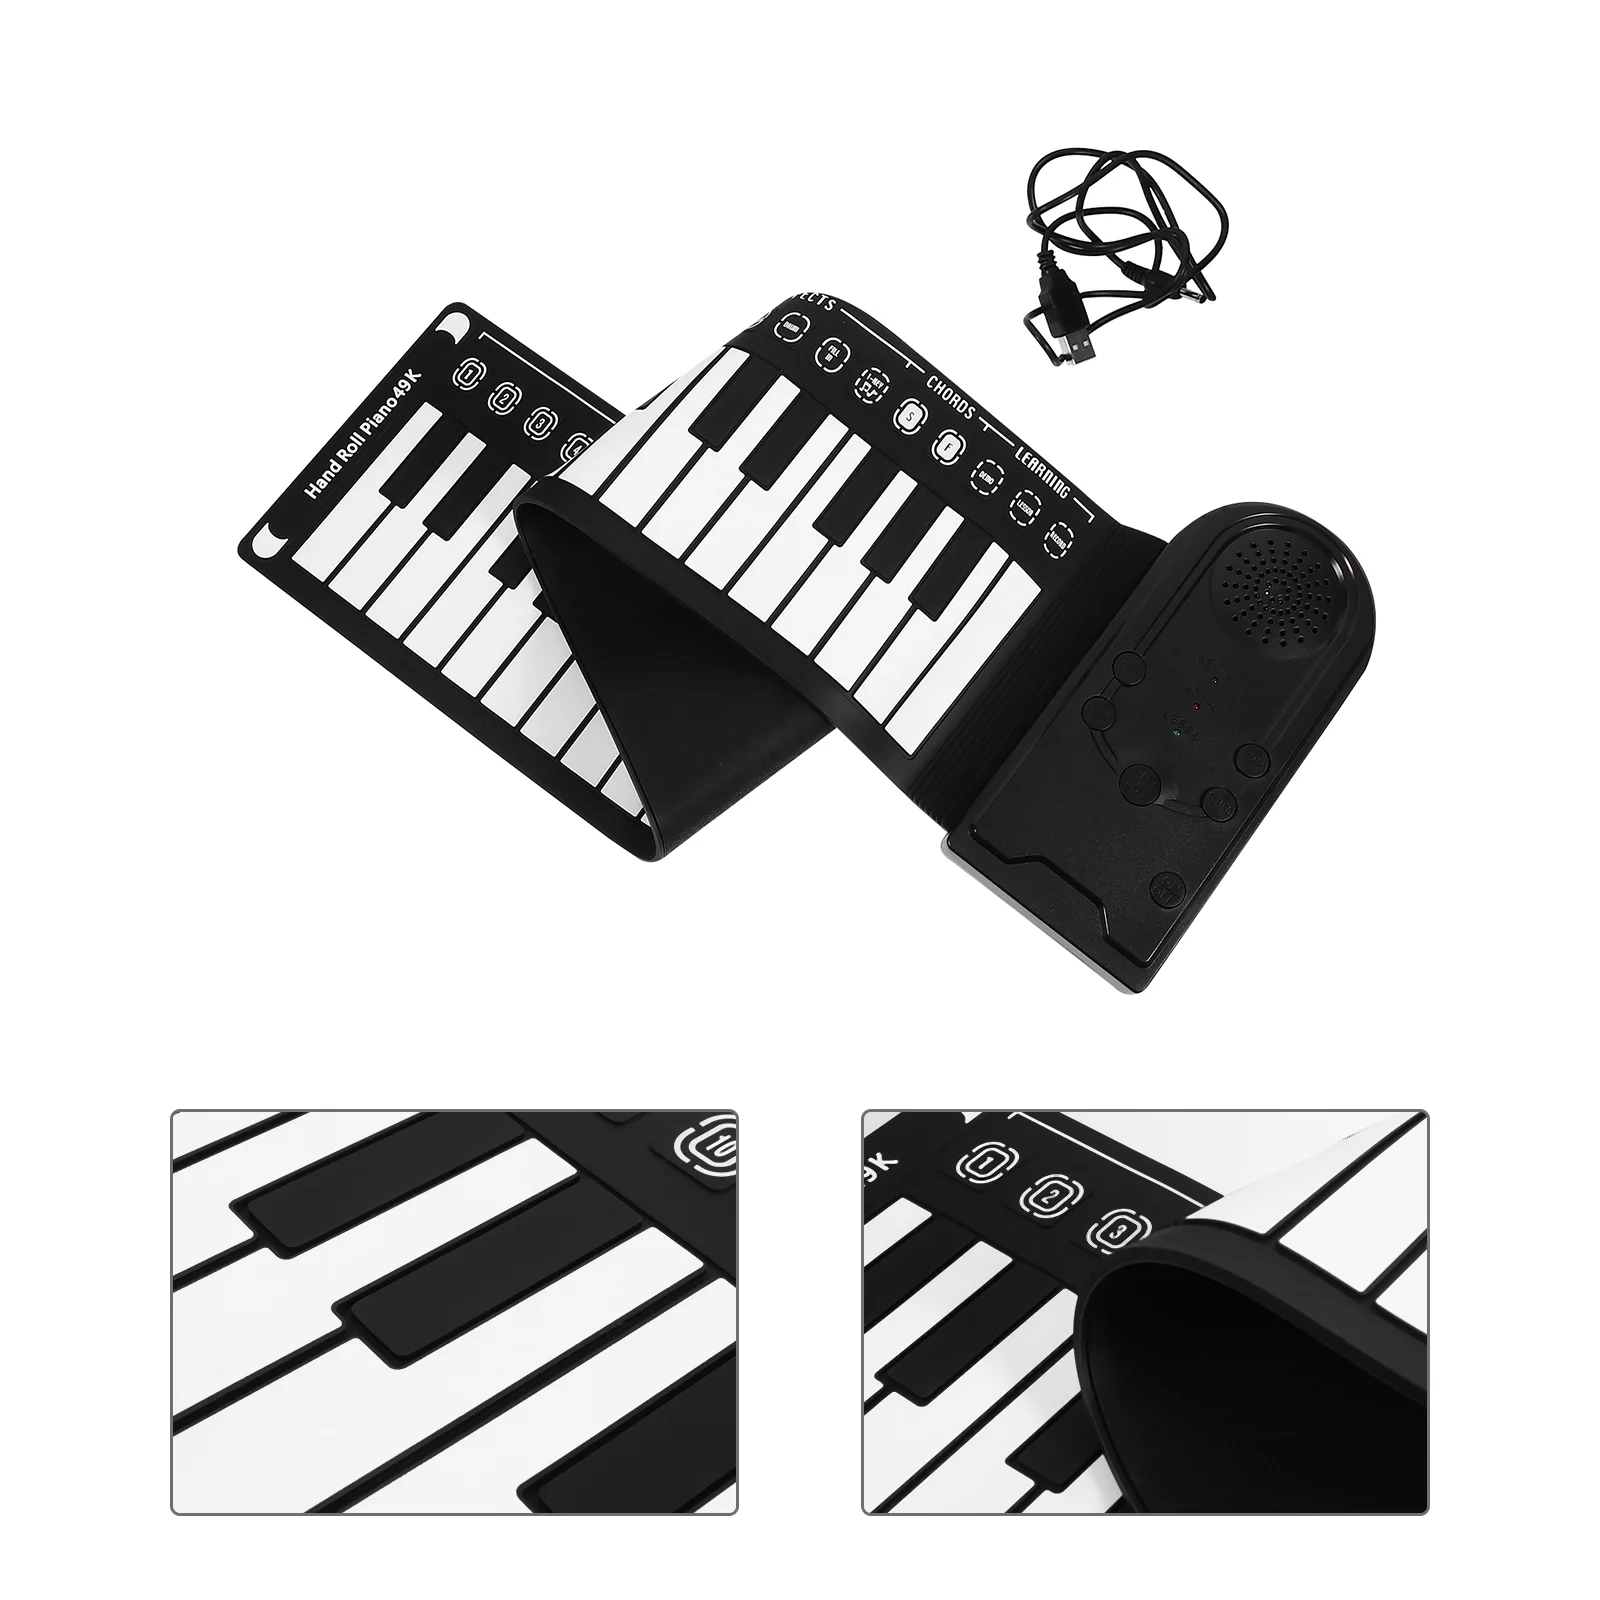 

Piano Roll Keyboard Electronic Up Hand Keys Foldable Digital Rolled Out Portable Volume Instrument Adjustable Mat Rollable